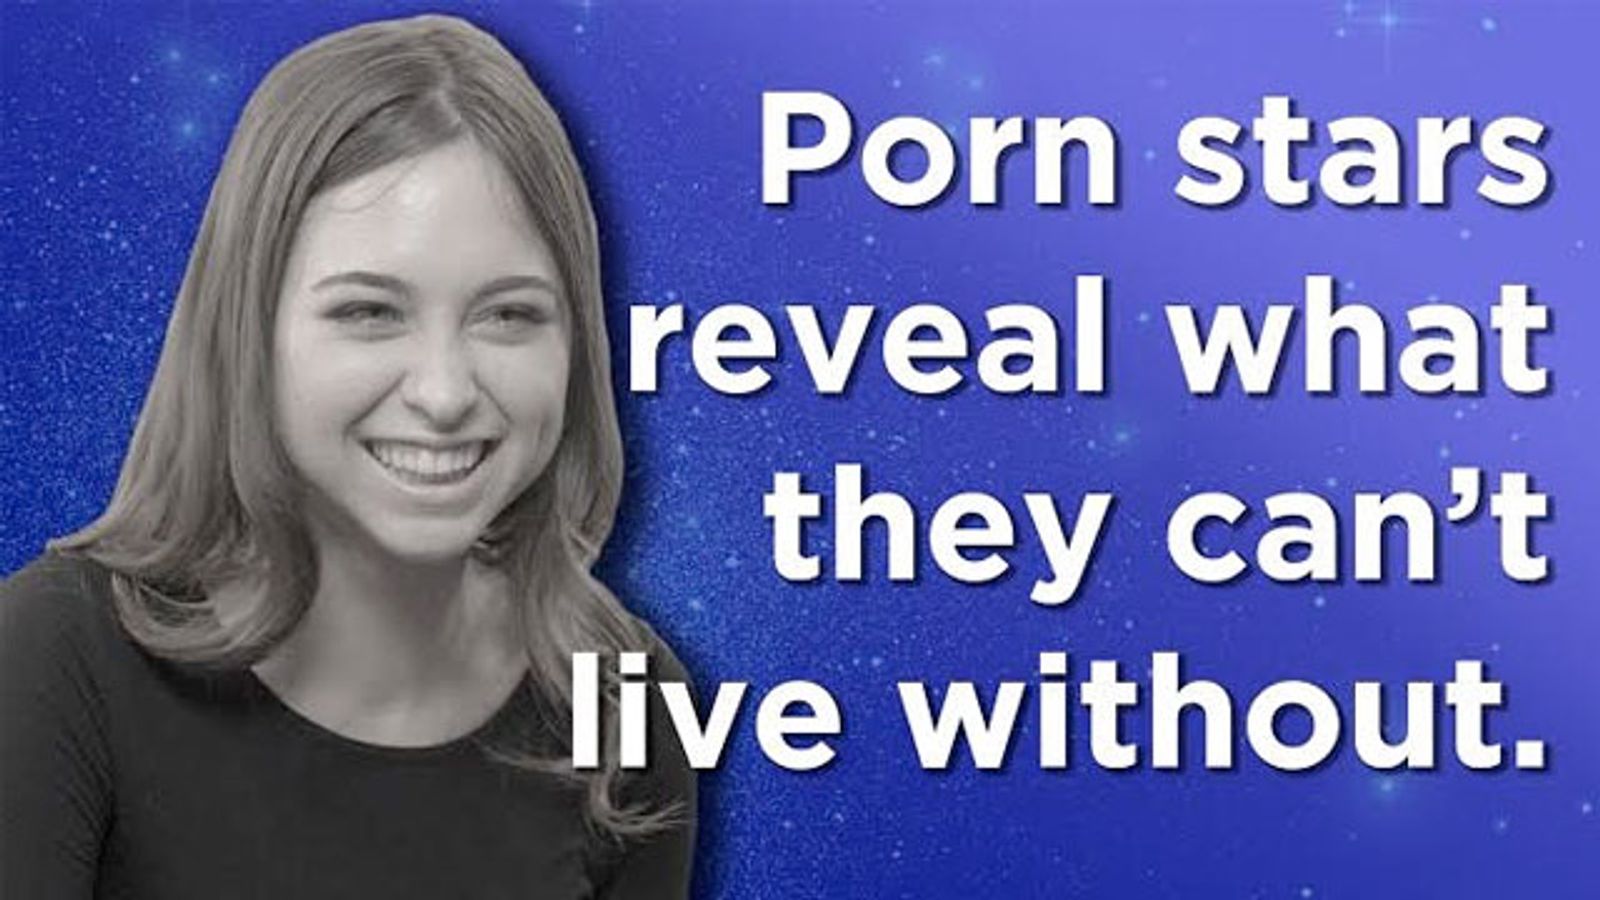 Adult Empire Asks Adult Stars 'What Can't You Live Without?'